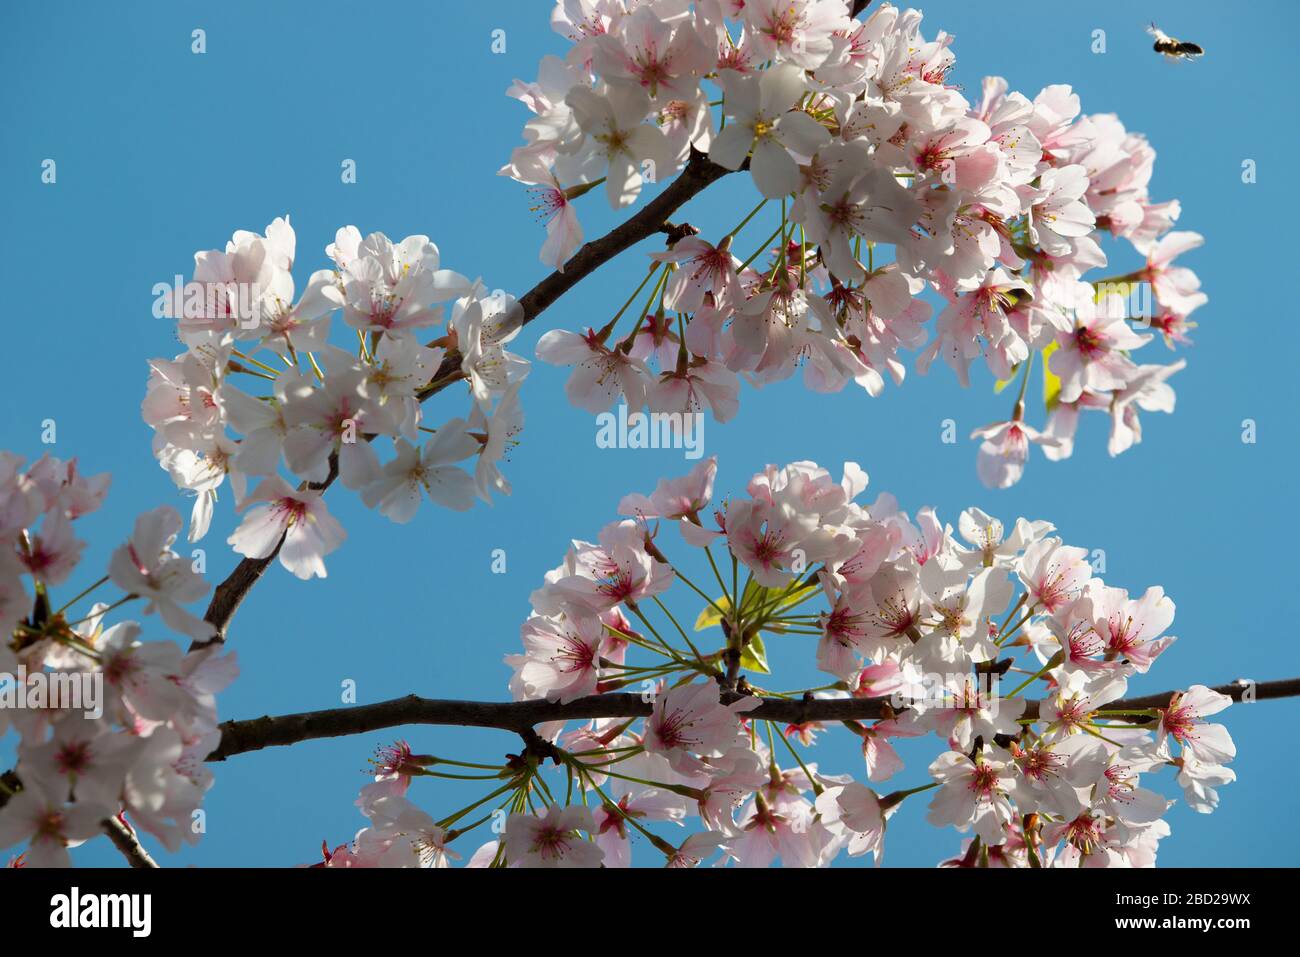 Horizontal shot of a honeybee approaching a flowering tree limb against a clear blue sky. Stock Photo